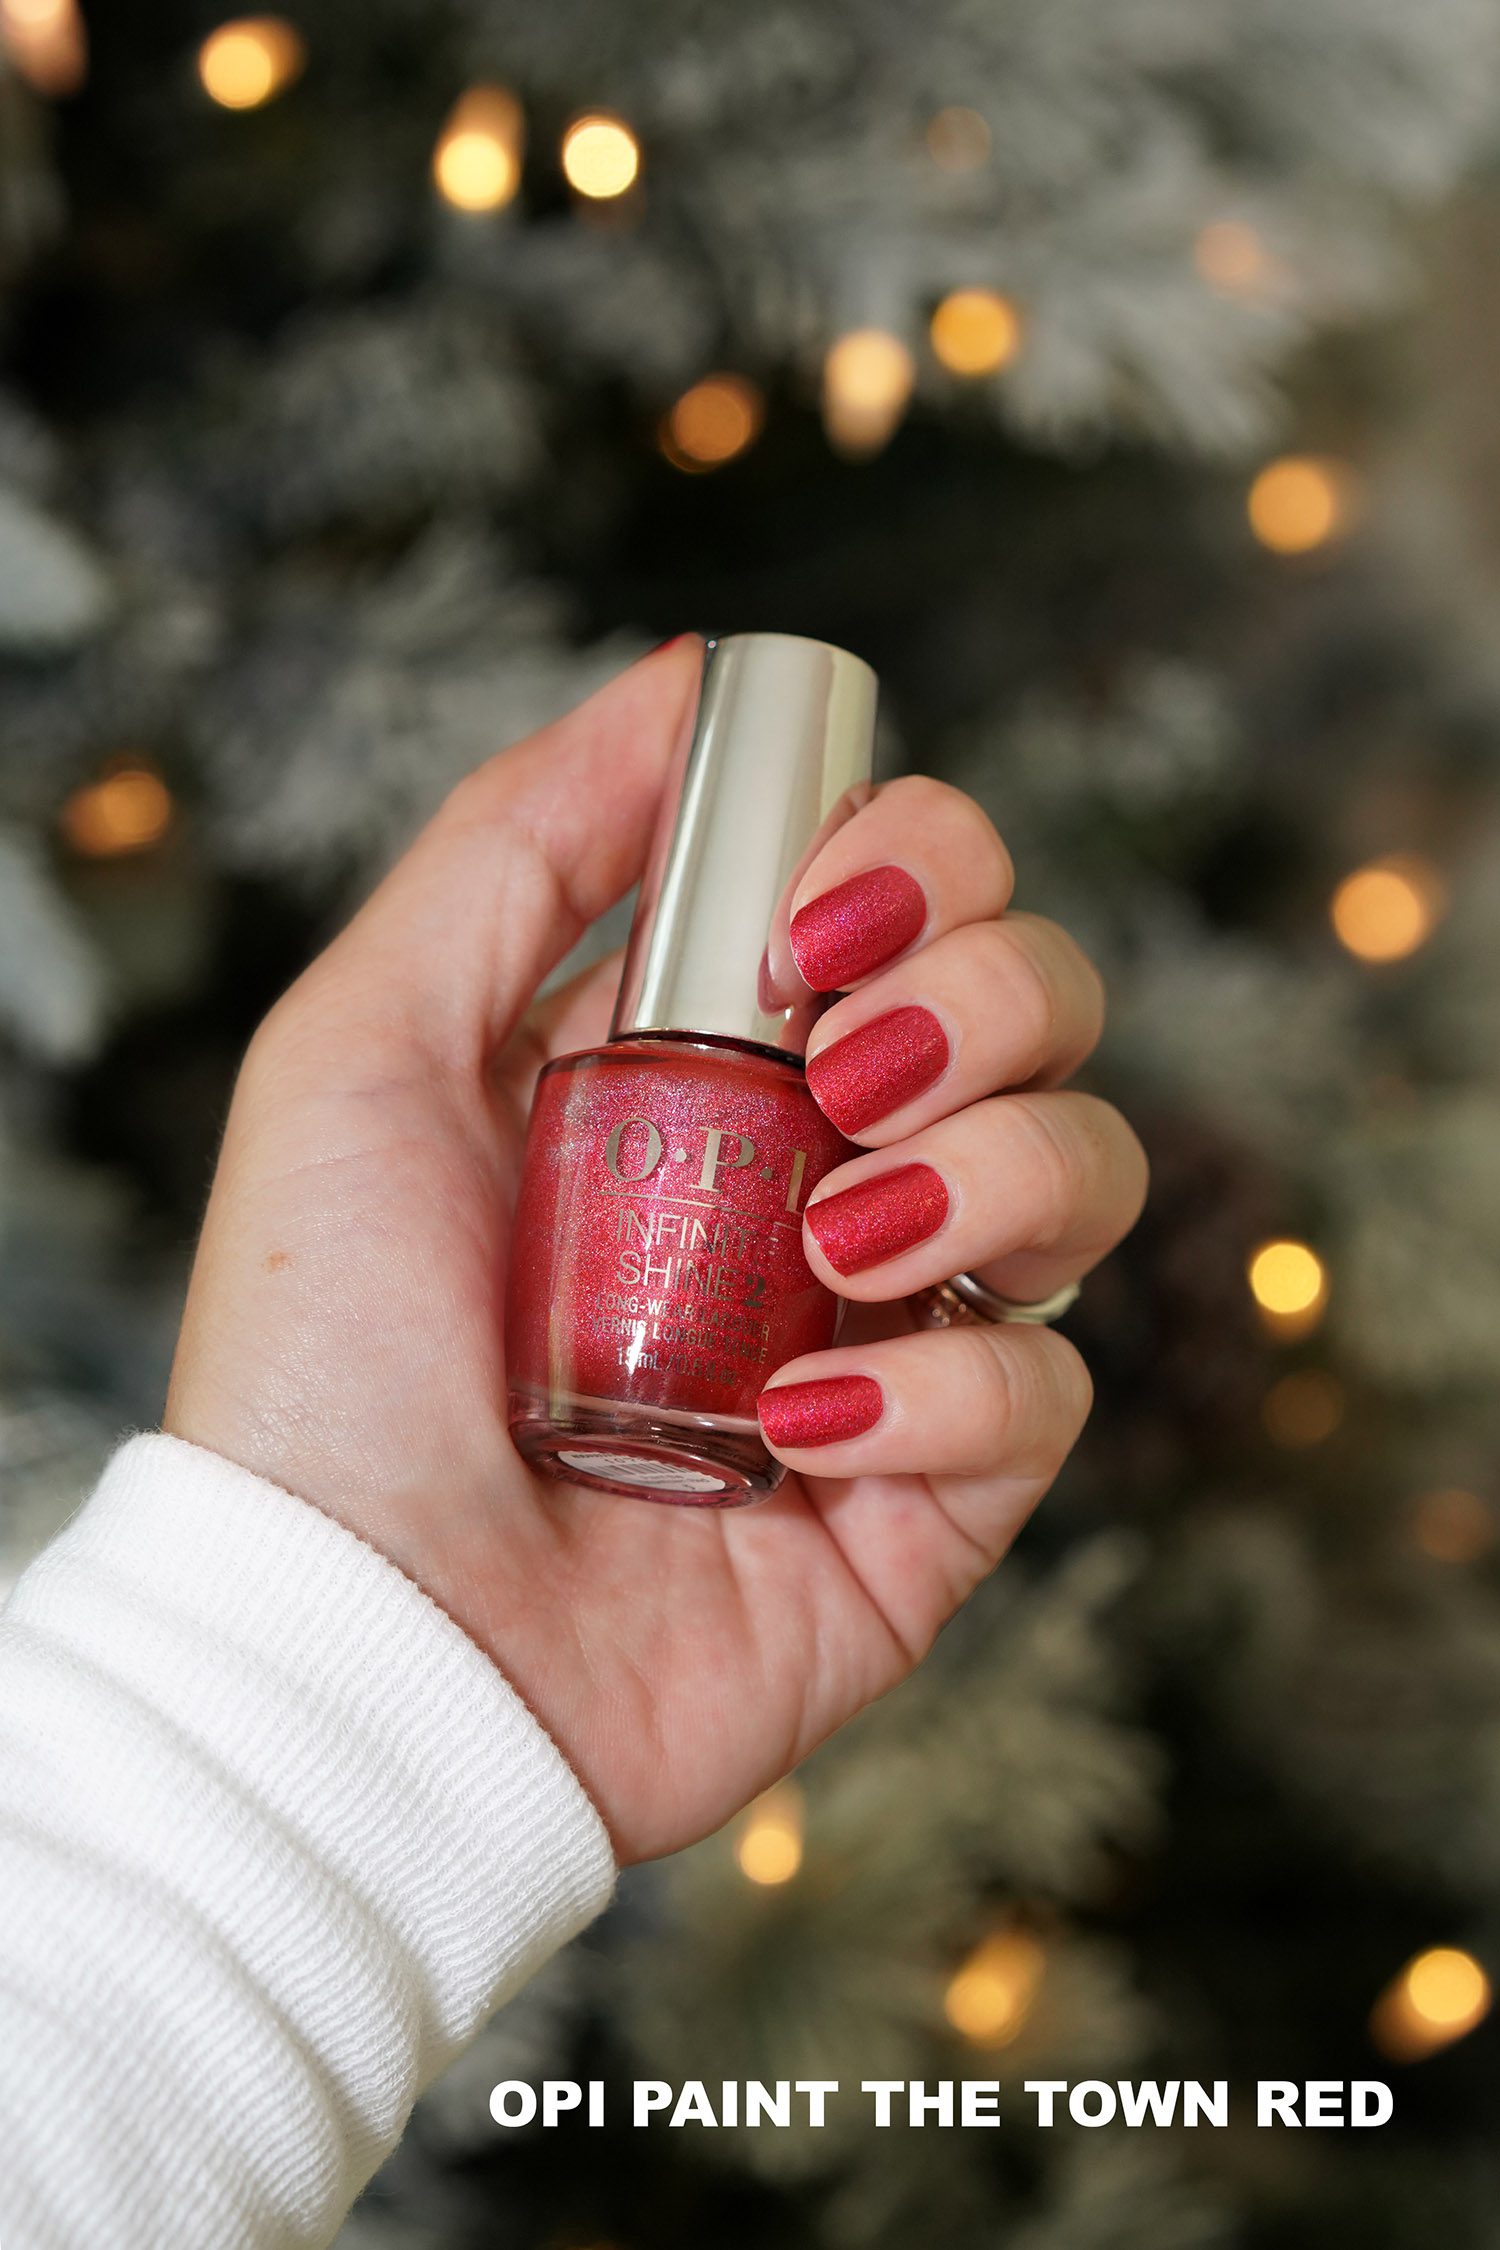 Holiday Nail Colors I'm Loving Right Now - The Beauty Look Book